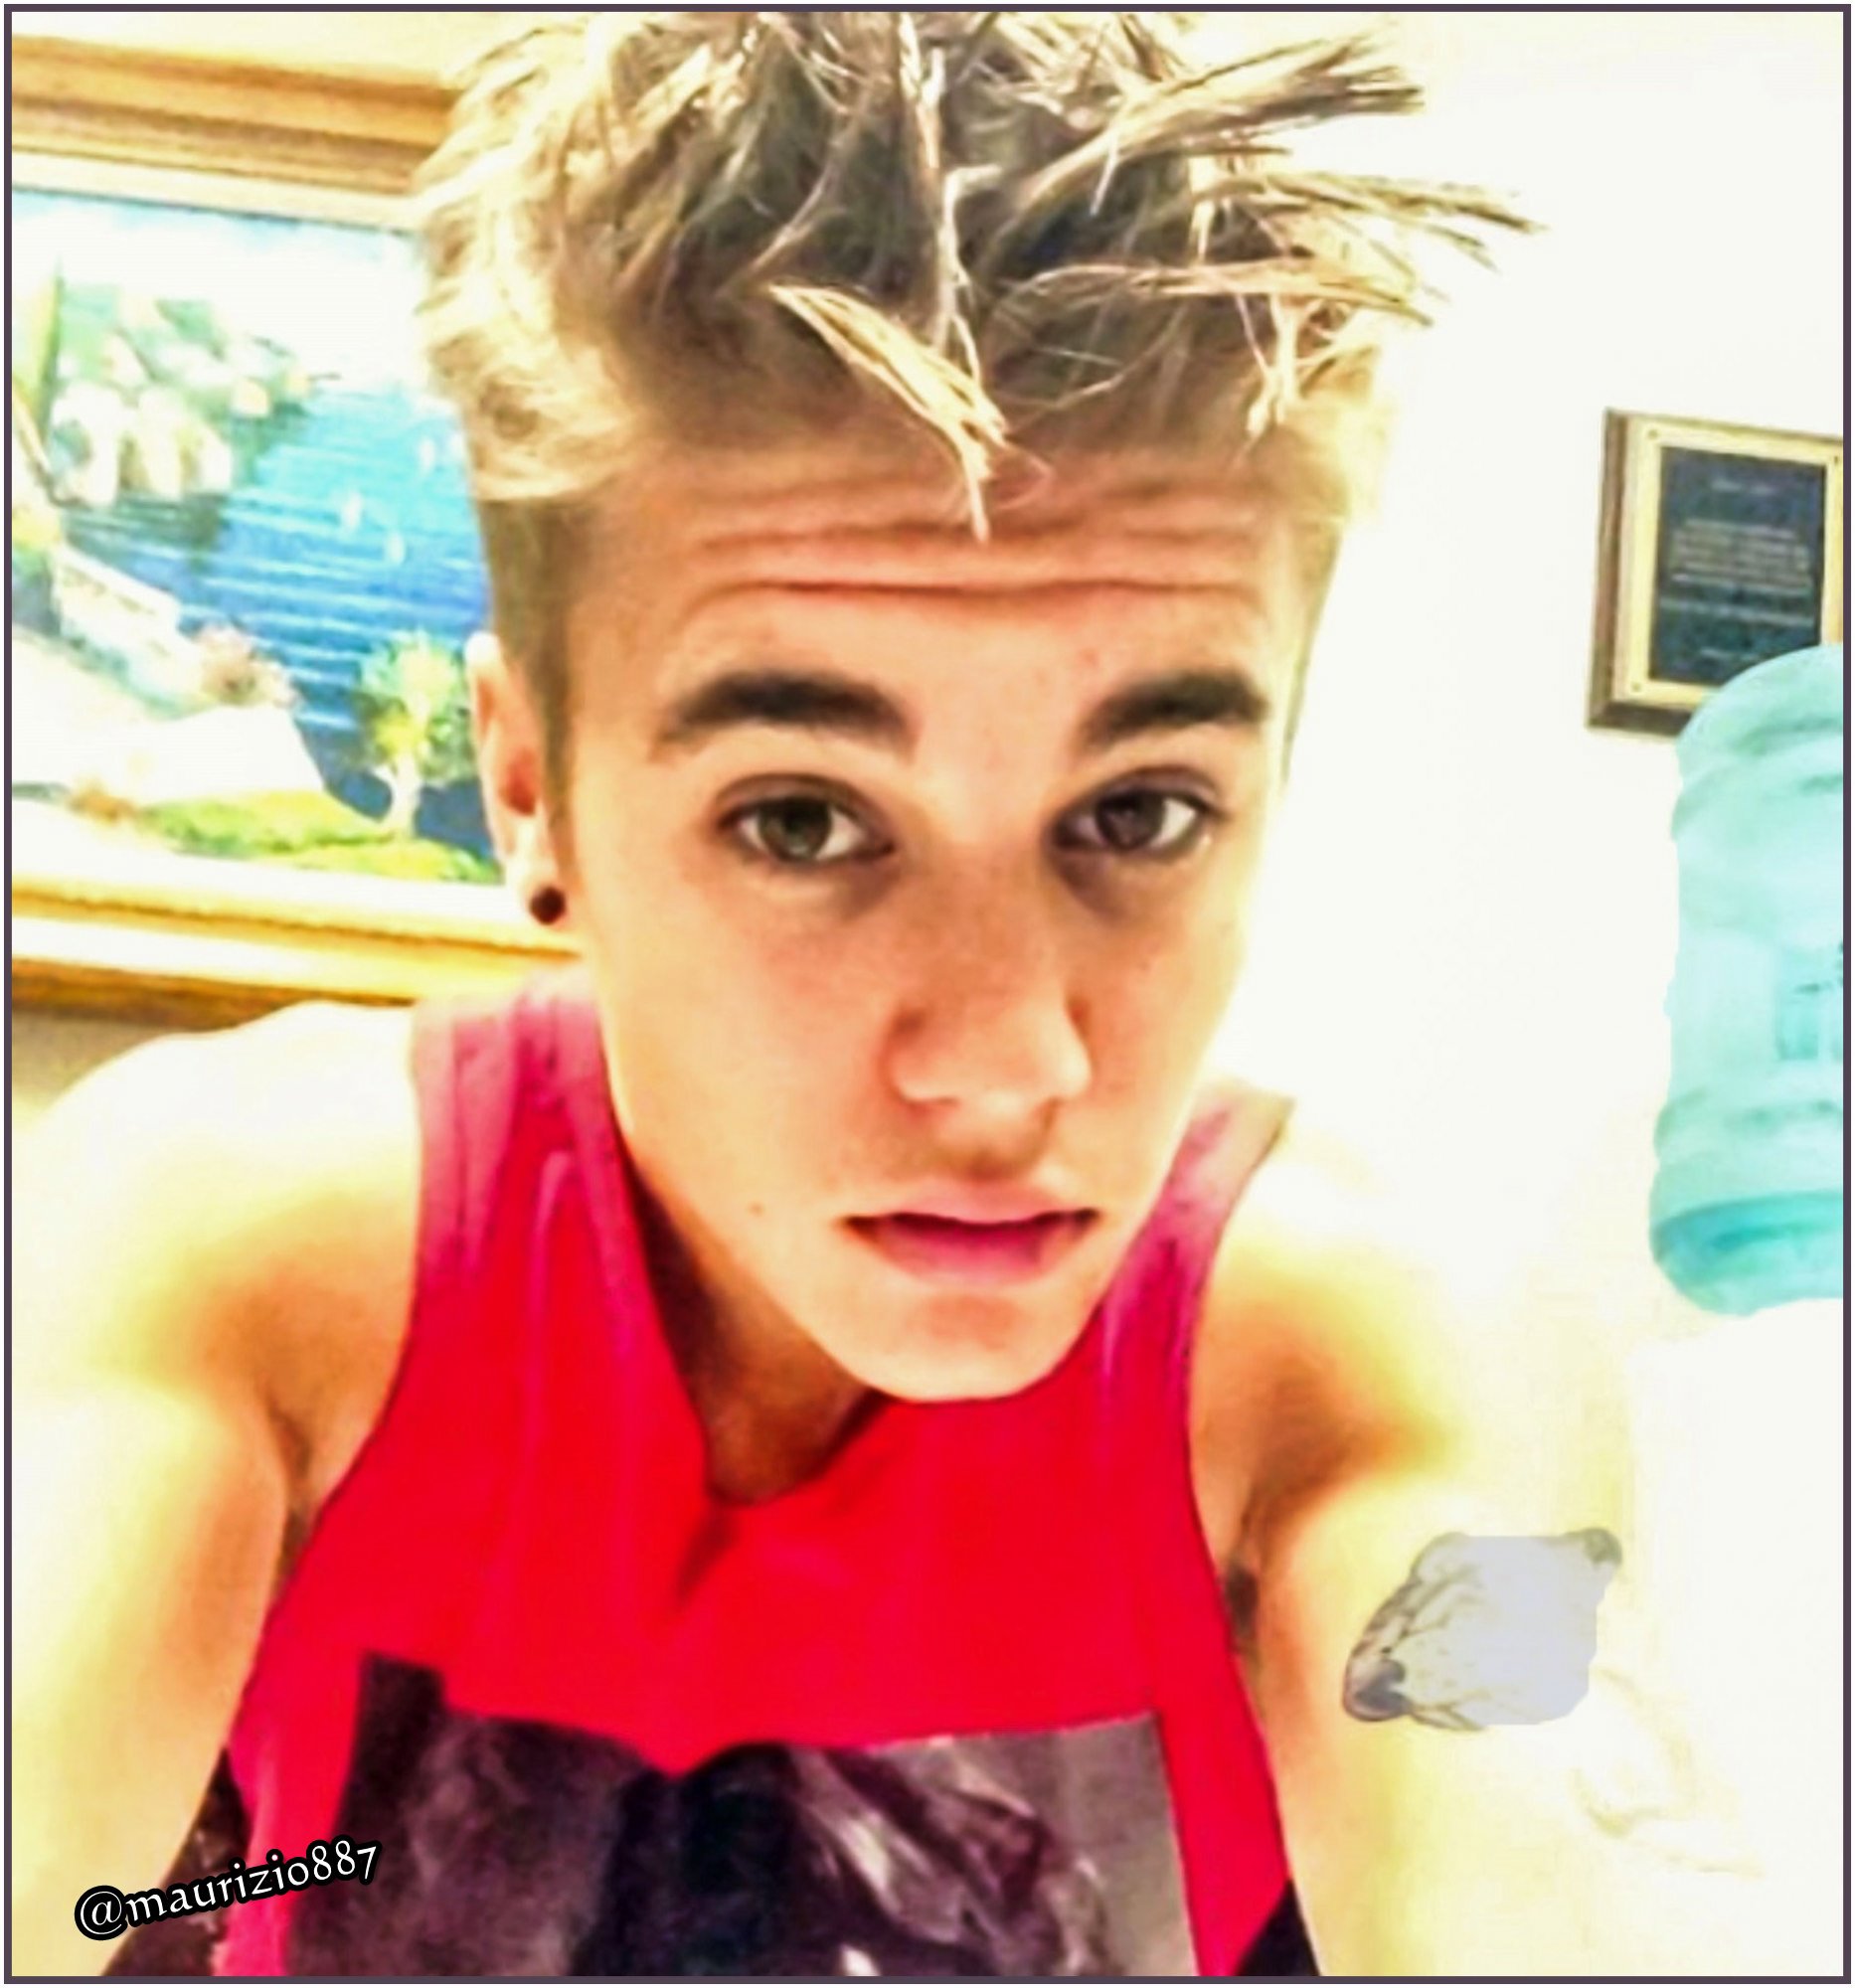 justin bieber new hair color photo - 4